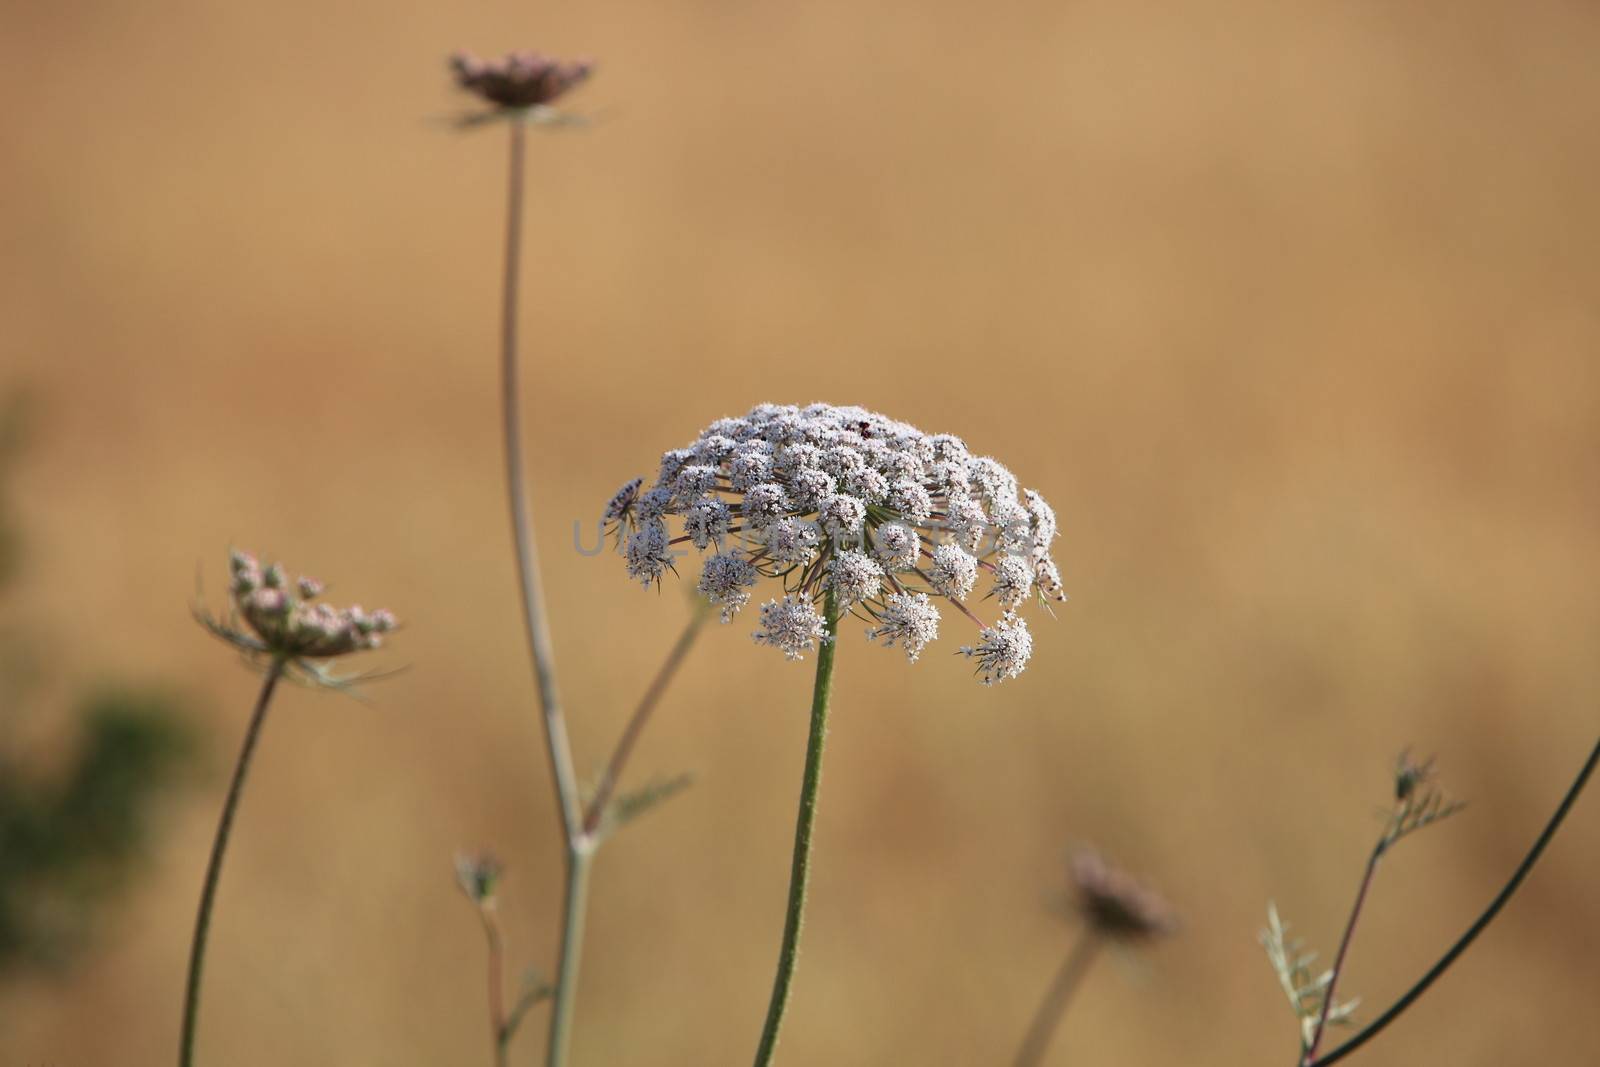 Queen Annes Lace by Farina6000